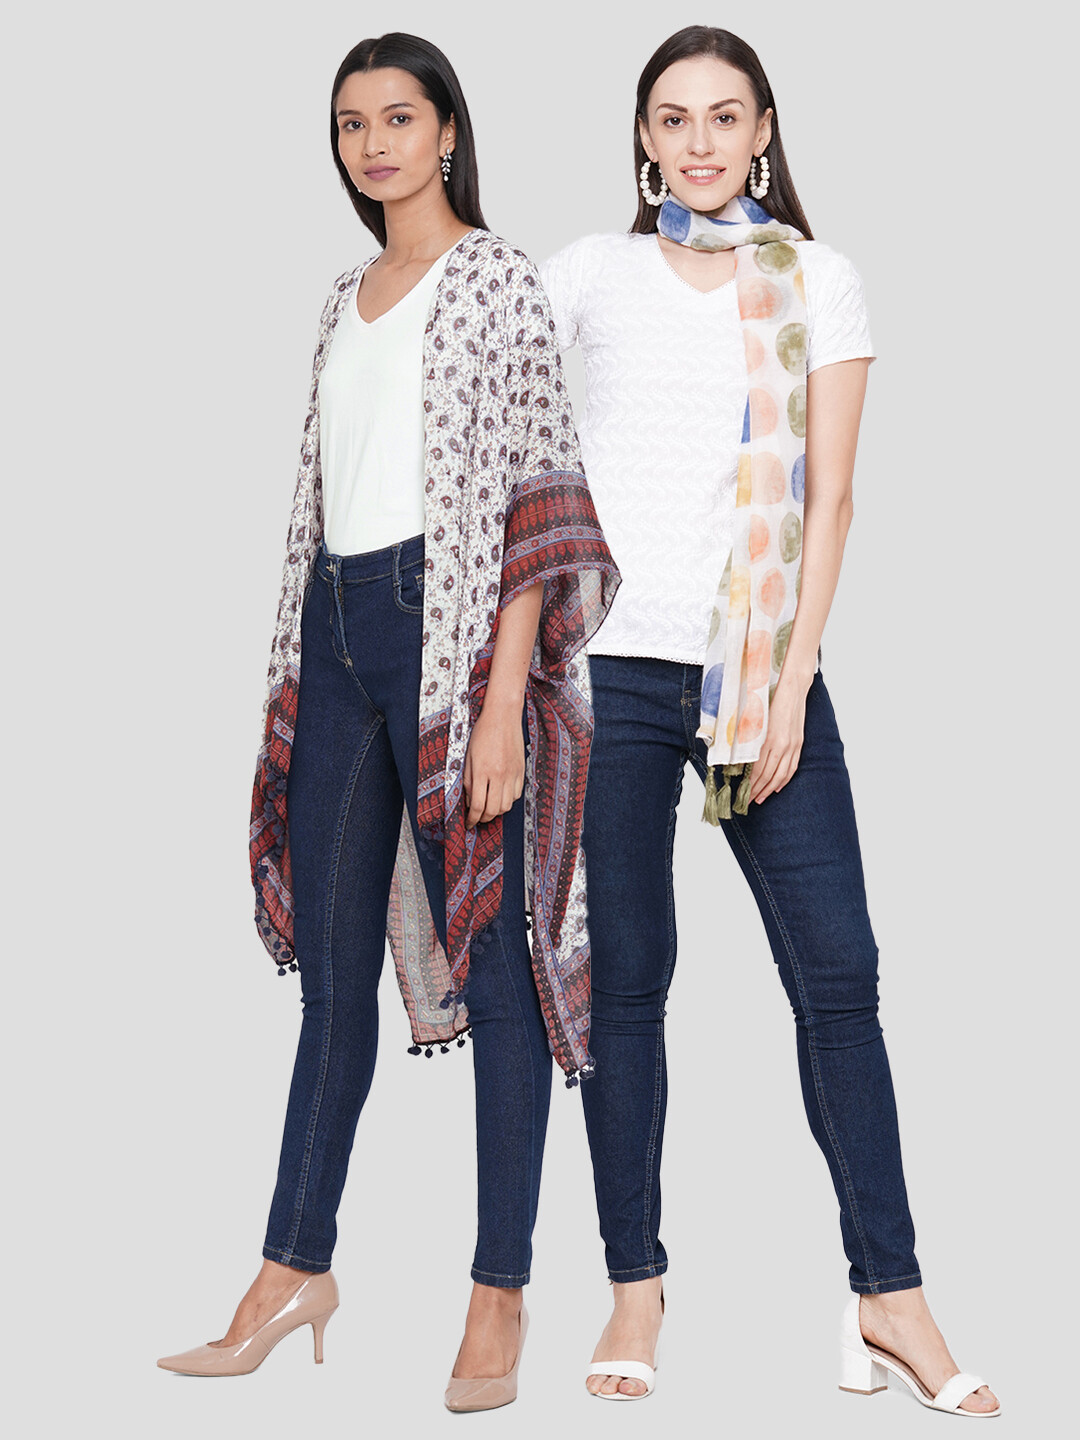 Stylist Printed Ponchos & Printed Scarf with Tassels -  Combo offer